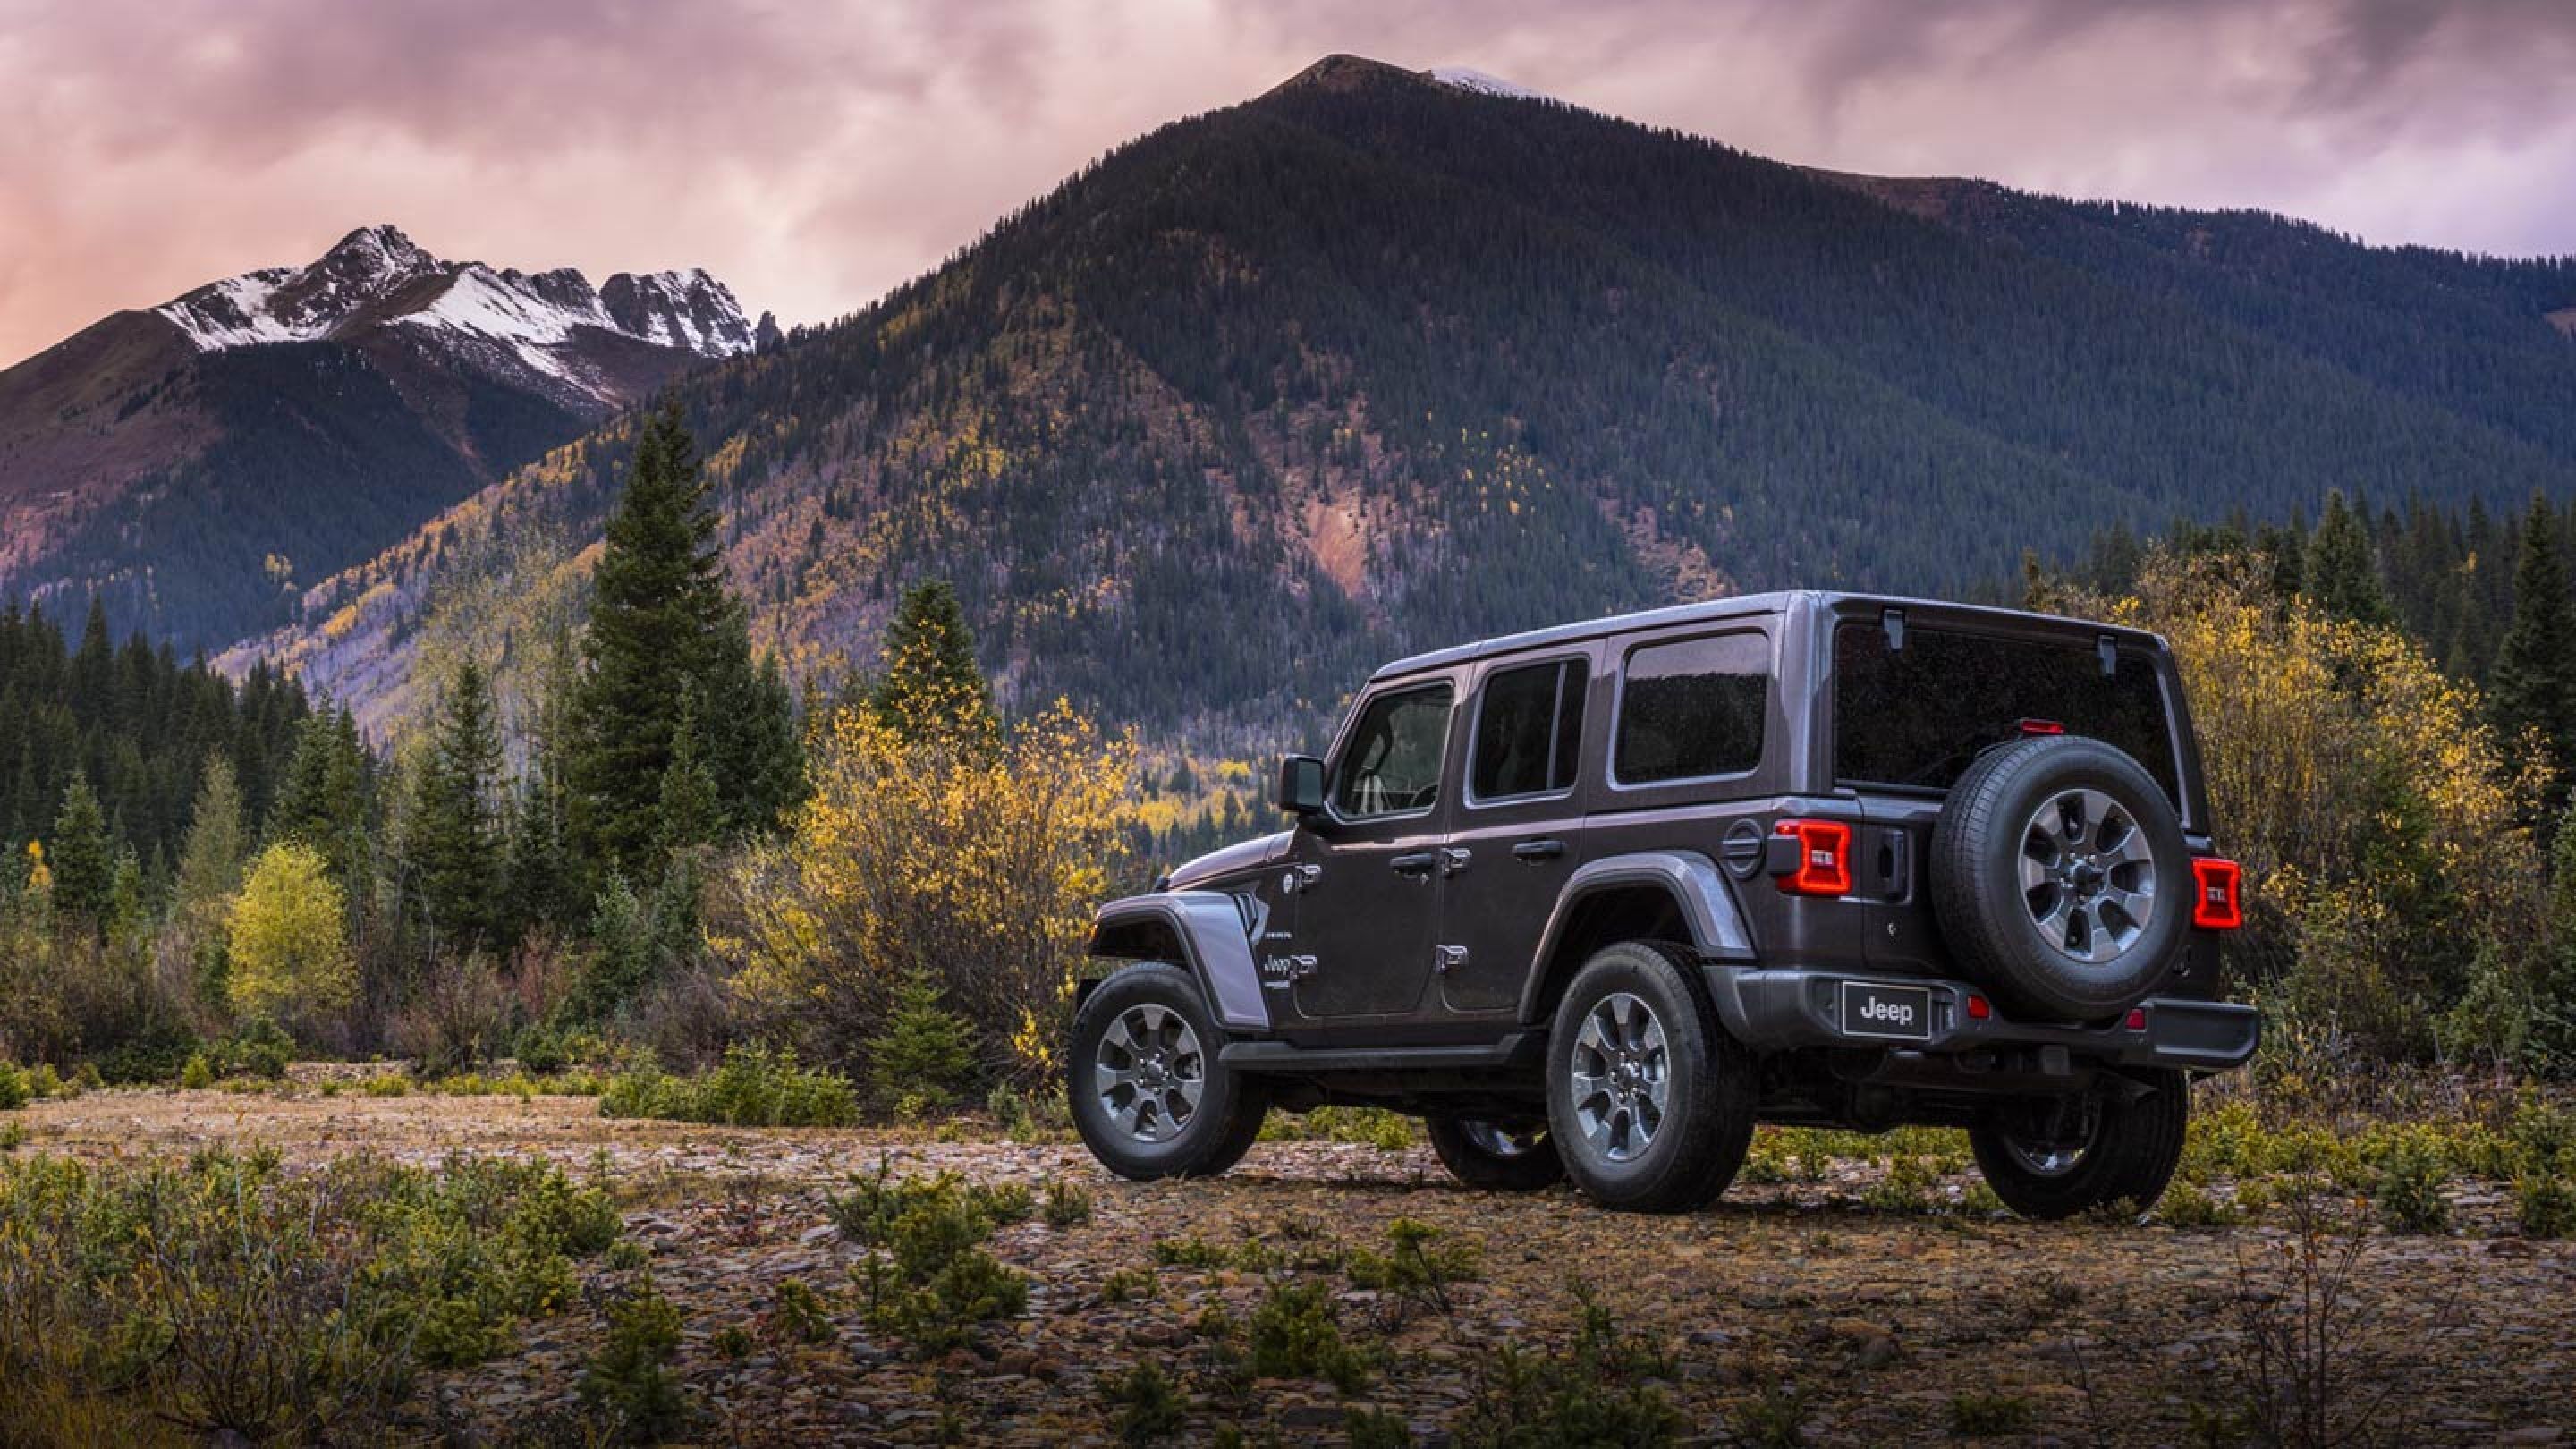 Jeep Wrangler parked on front of mountains